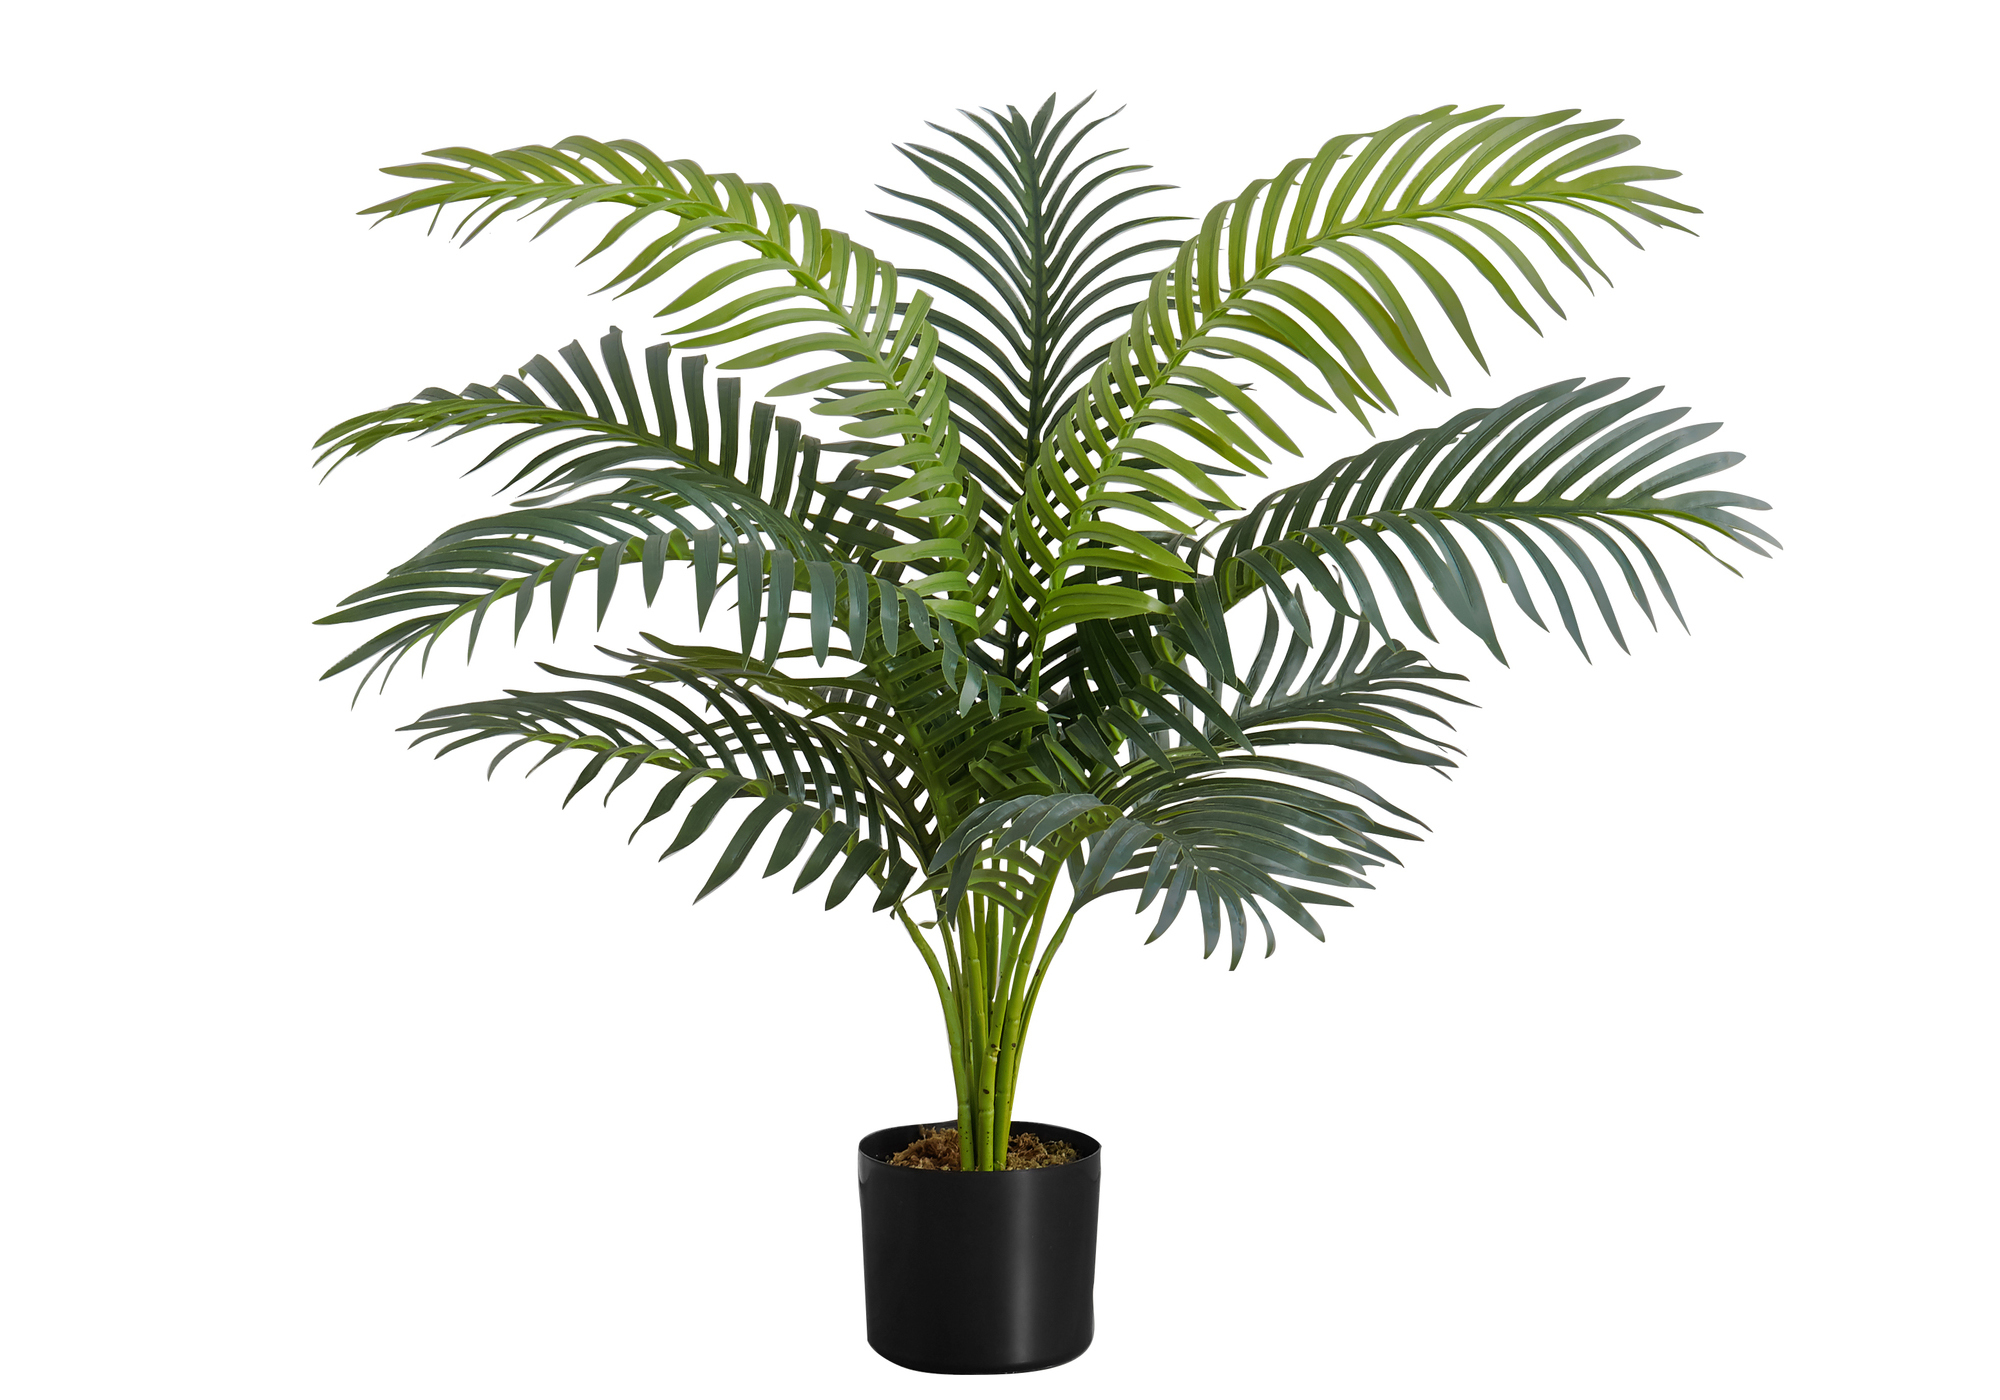 ARTIFICIAL PLANT - 34"H / INDOOR PALM TREE IN A 5" POT